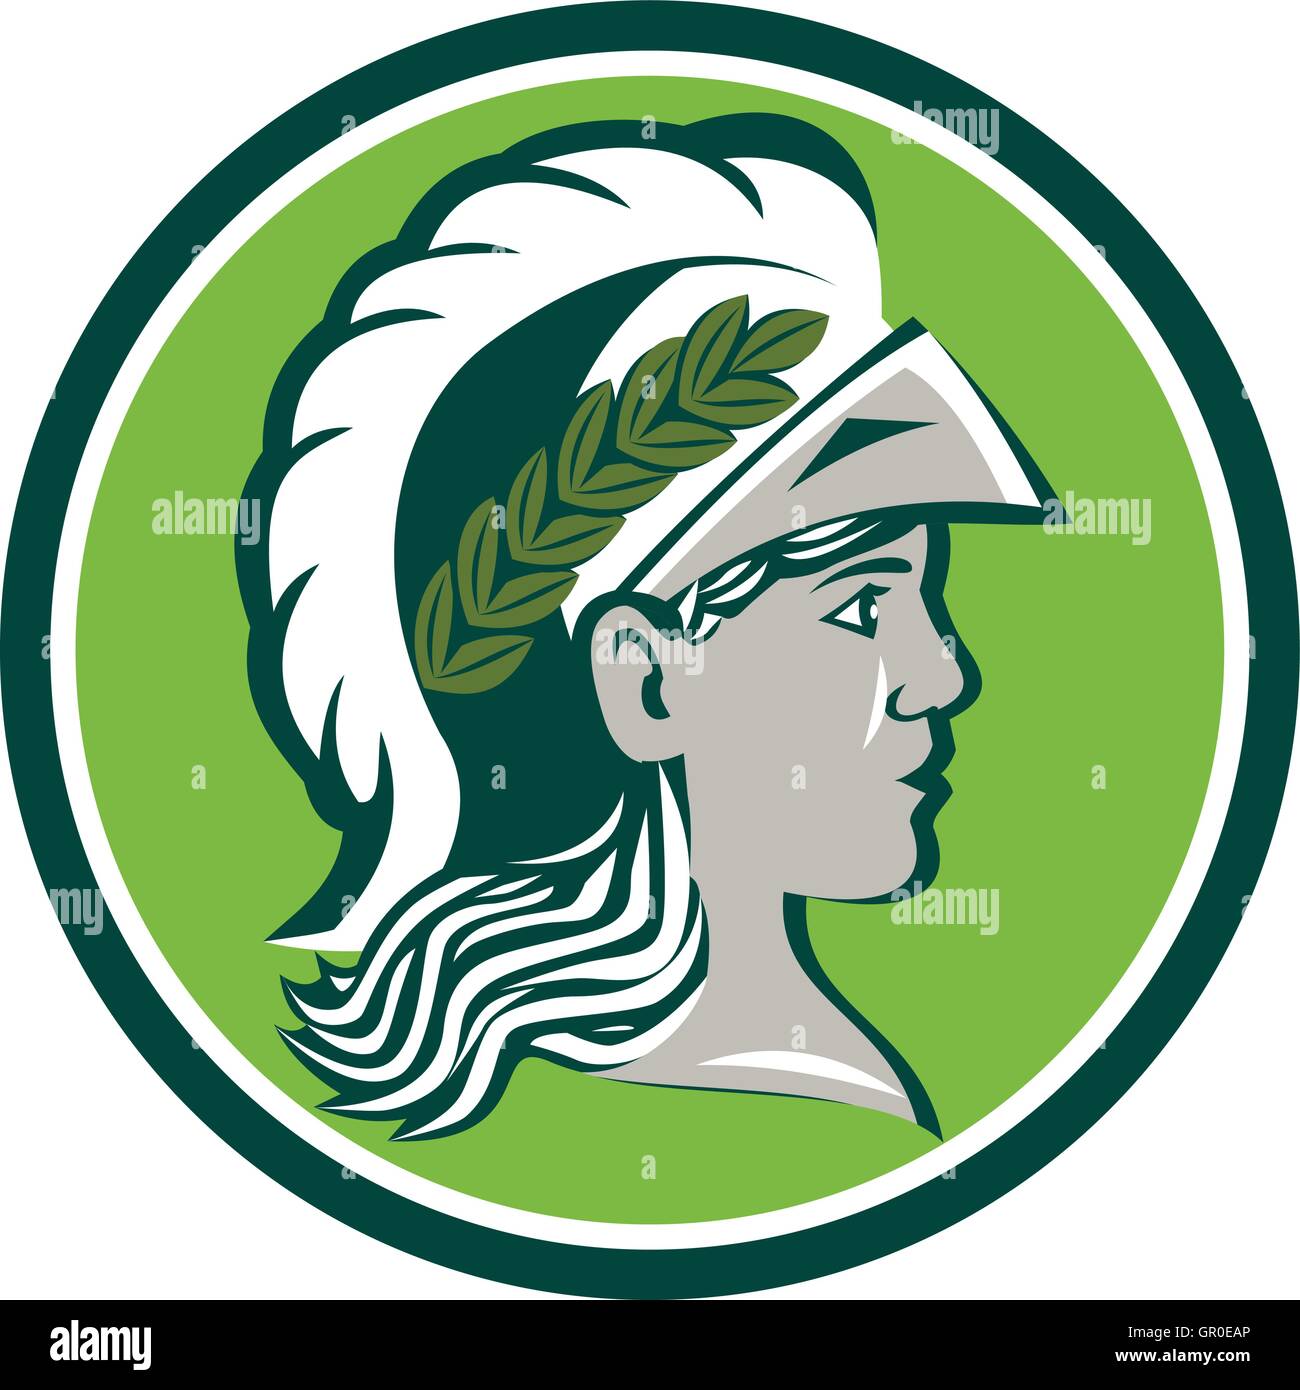 Illustration of Minerva or Menrva, the Roman goddess of wisdom and sponsor of arts, trade, and strategy wearing helmet and laurel crown viewed from side set inside circle on isolated white background done in retro style. Stock Vector